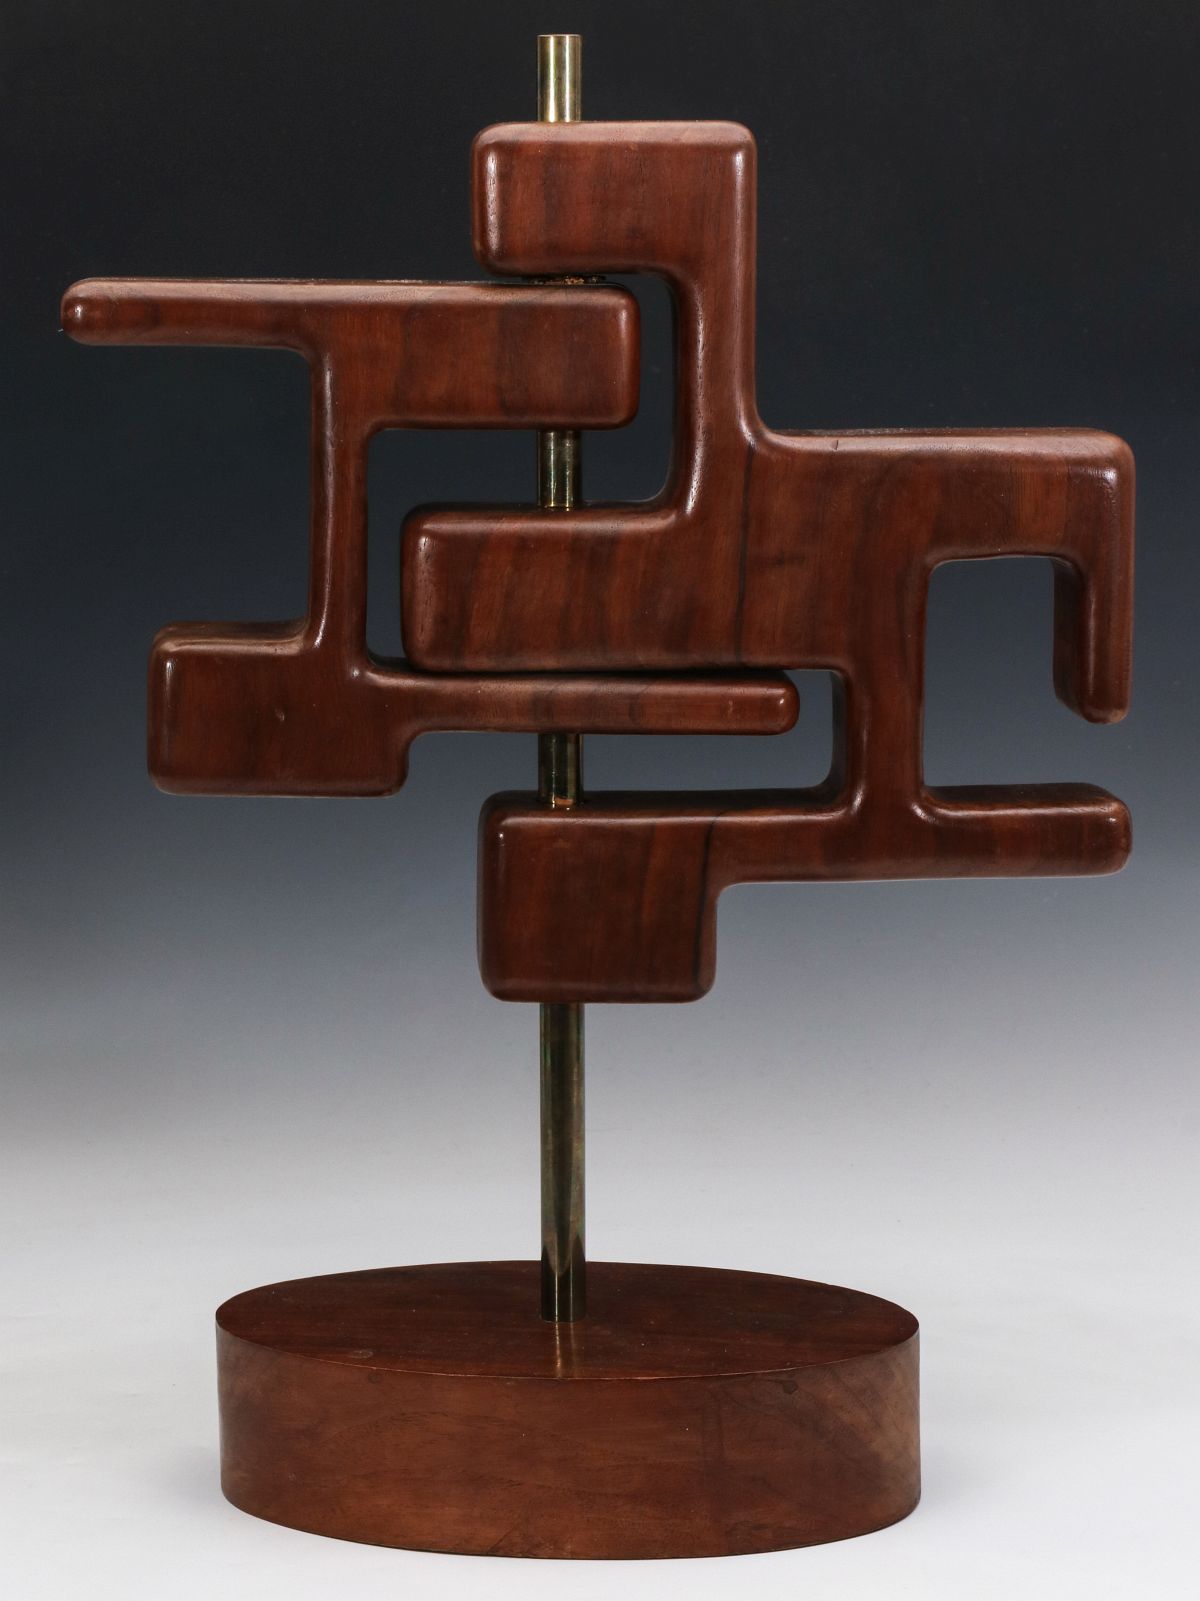 CECIL HEDQUIST (20TH C.) ABSTRACT WOOD SCULPTURES